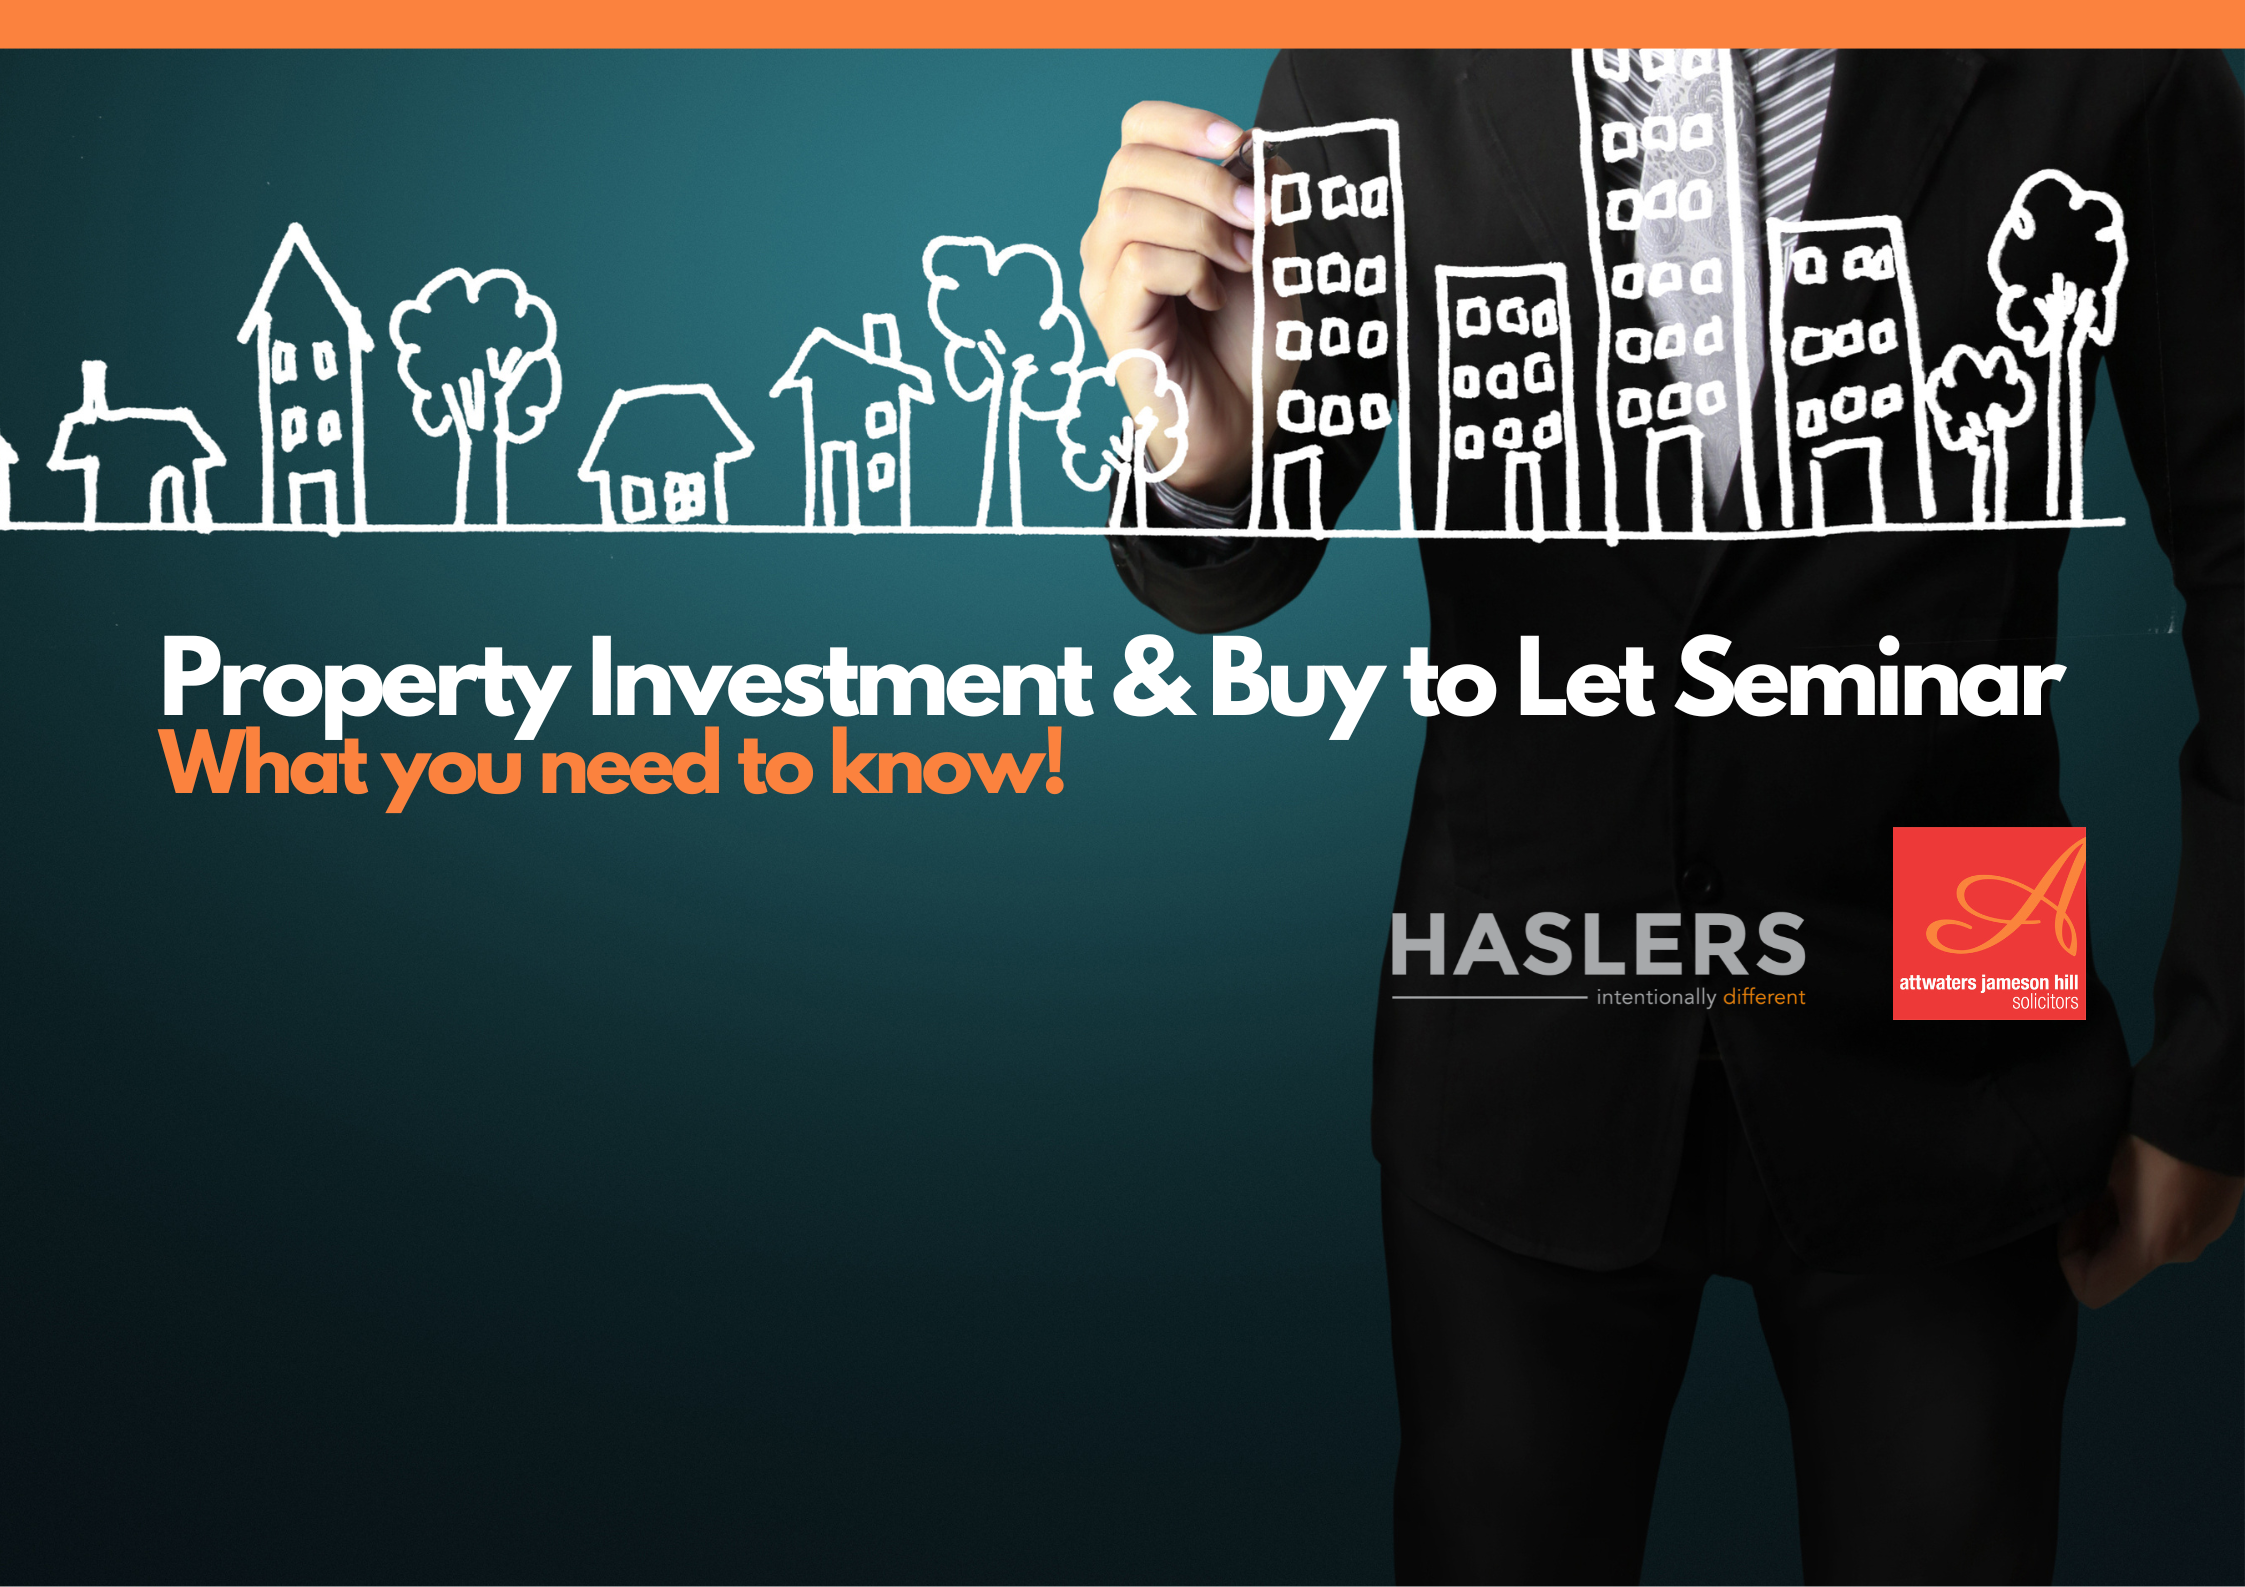 Property Investment & Buy to Let Seminar - What you need to know!